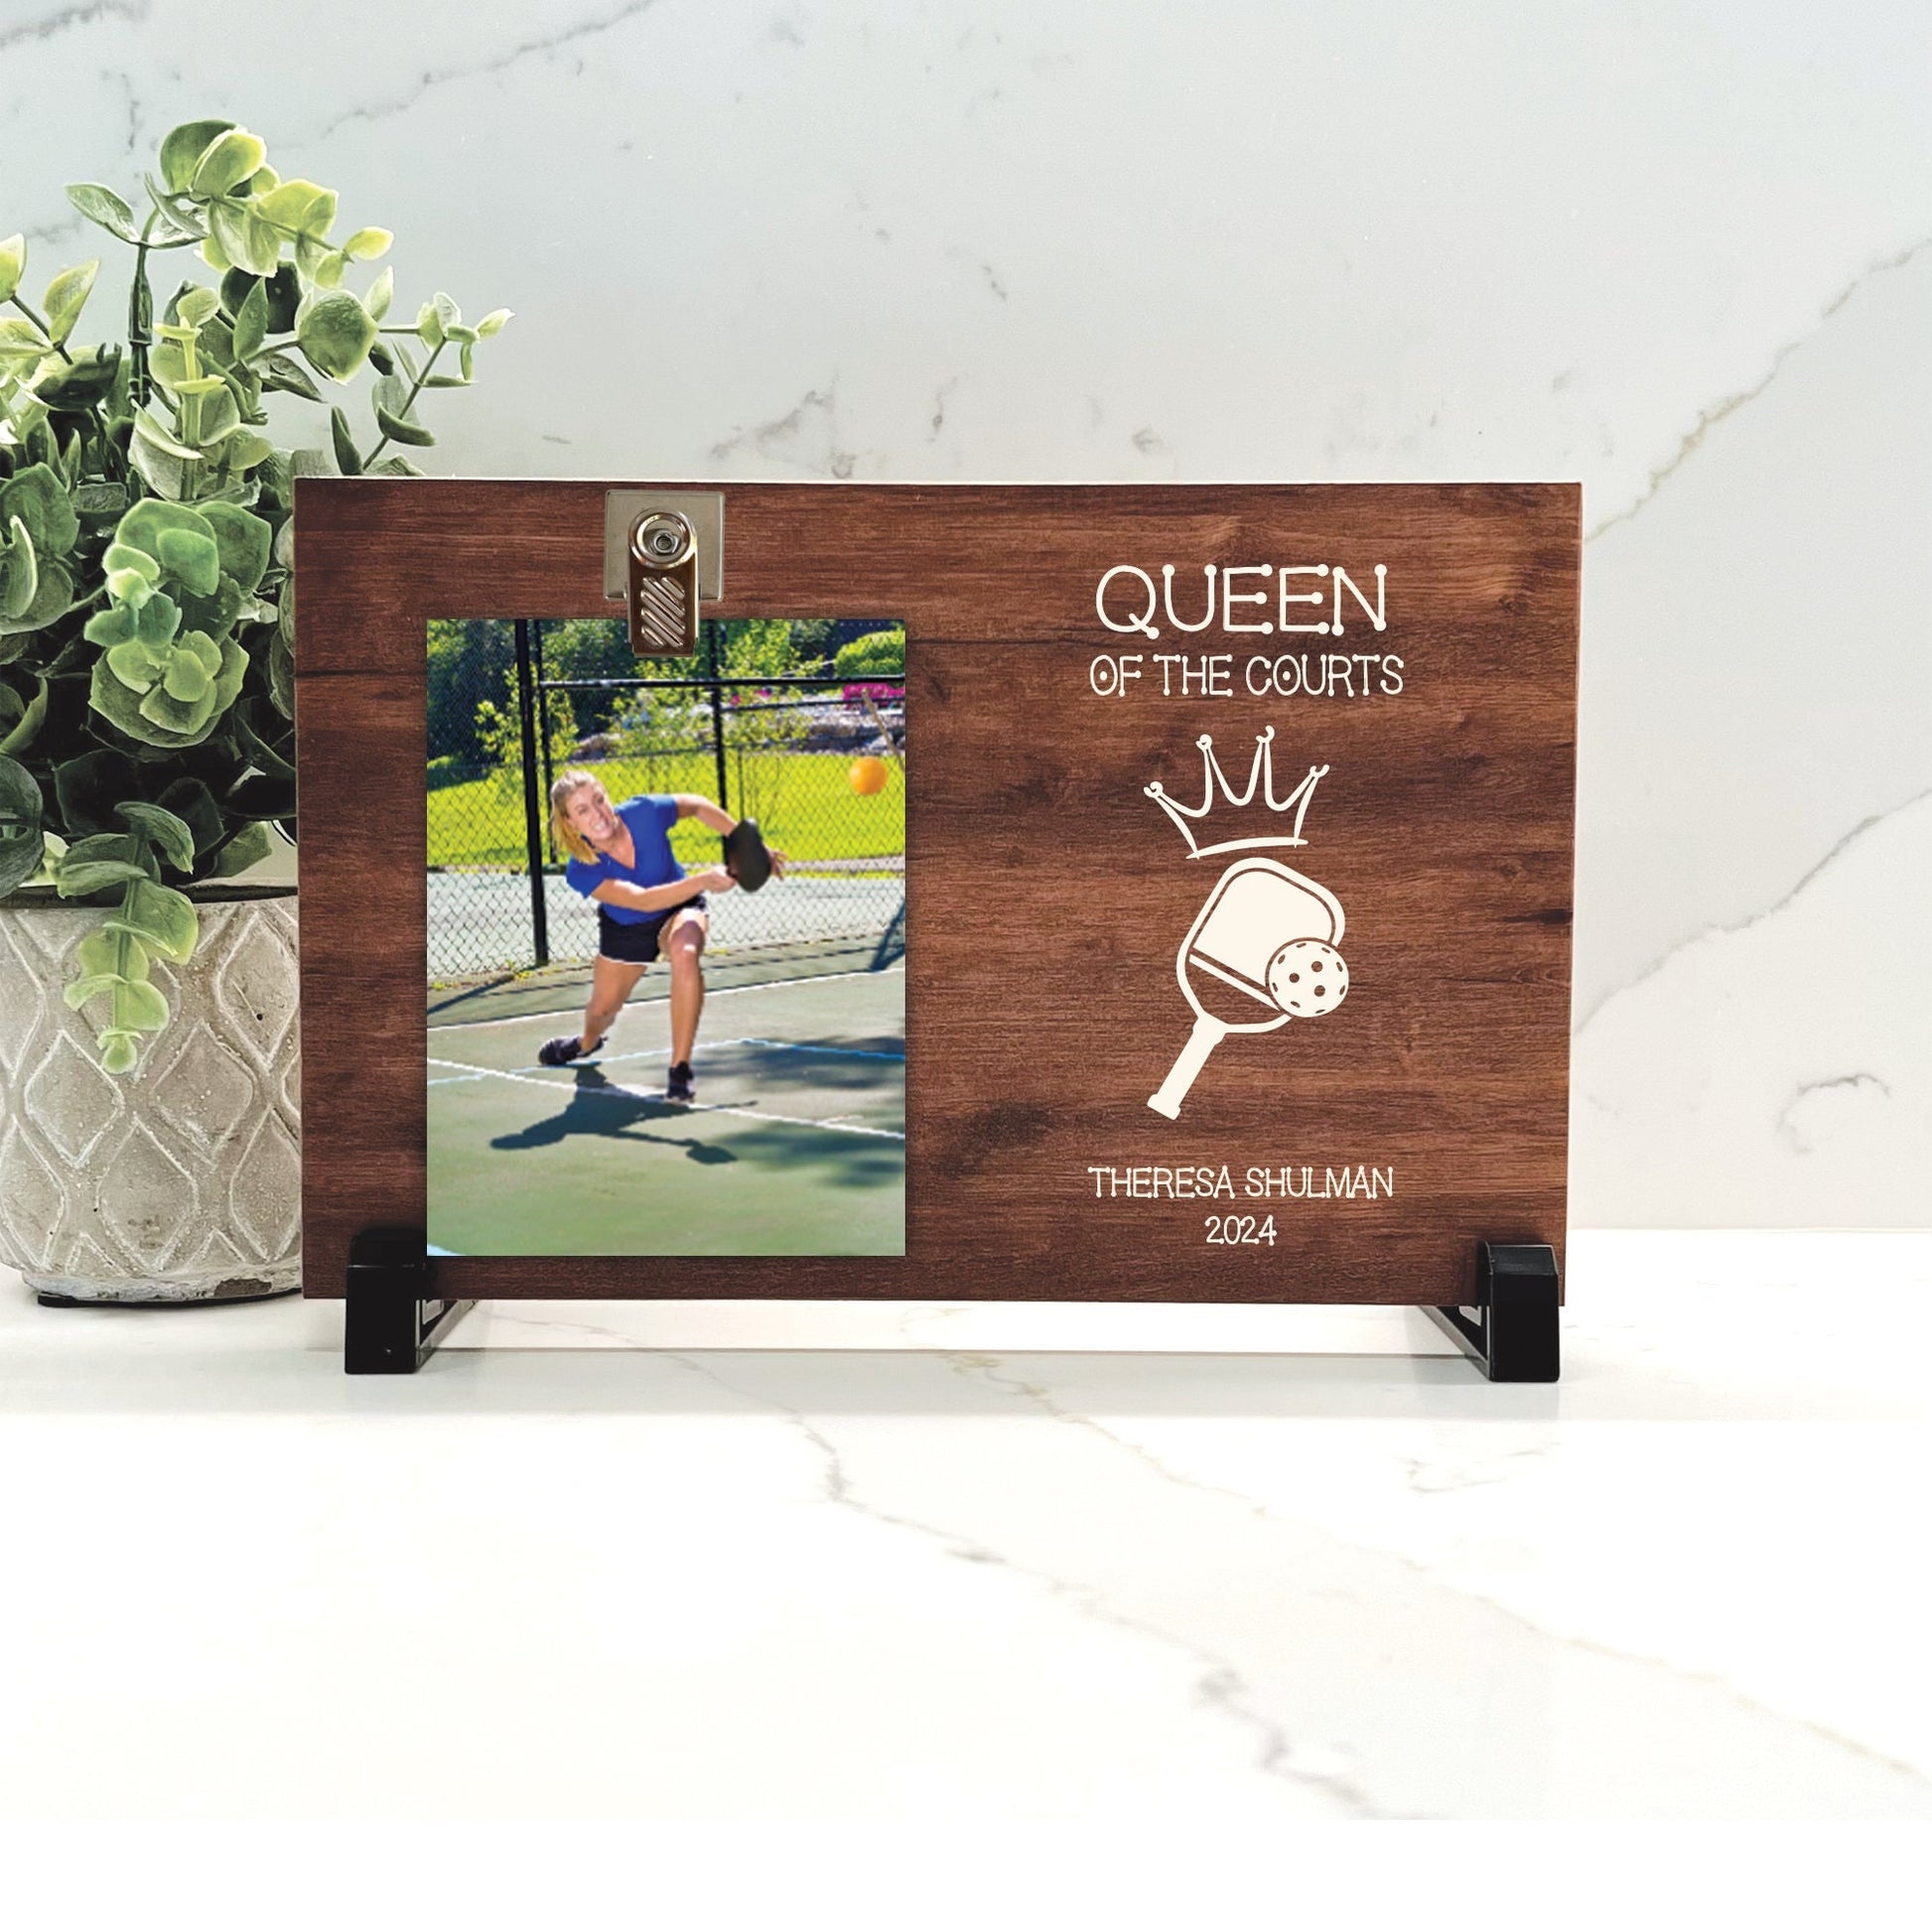 Customize your cherished moments with our Pickleball Personalized Picture Frame available at www.florida-funshine.com. Create a heartfelt gift for family and friends with free personalization, quick shipping in 1-2 business days, and quality crafted picture frames, portraits, and plaques made in the USA."